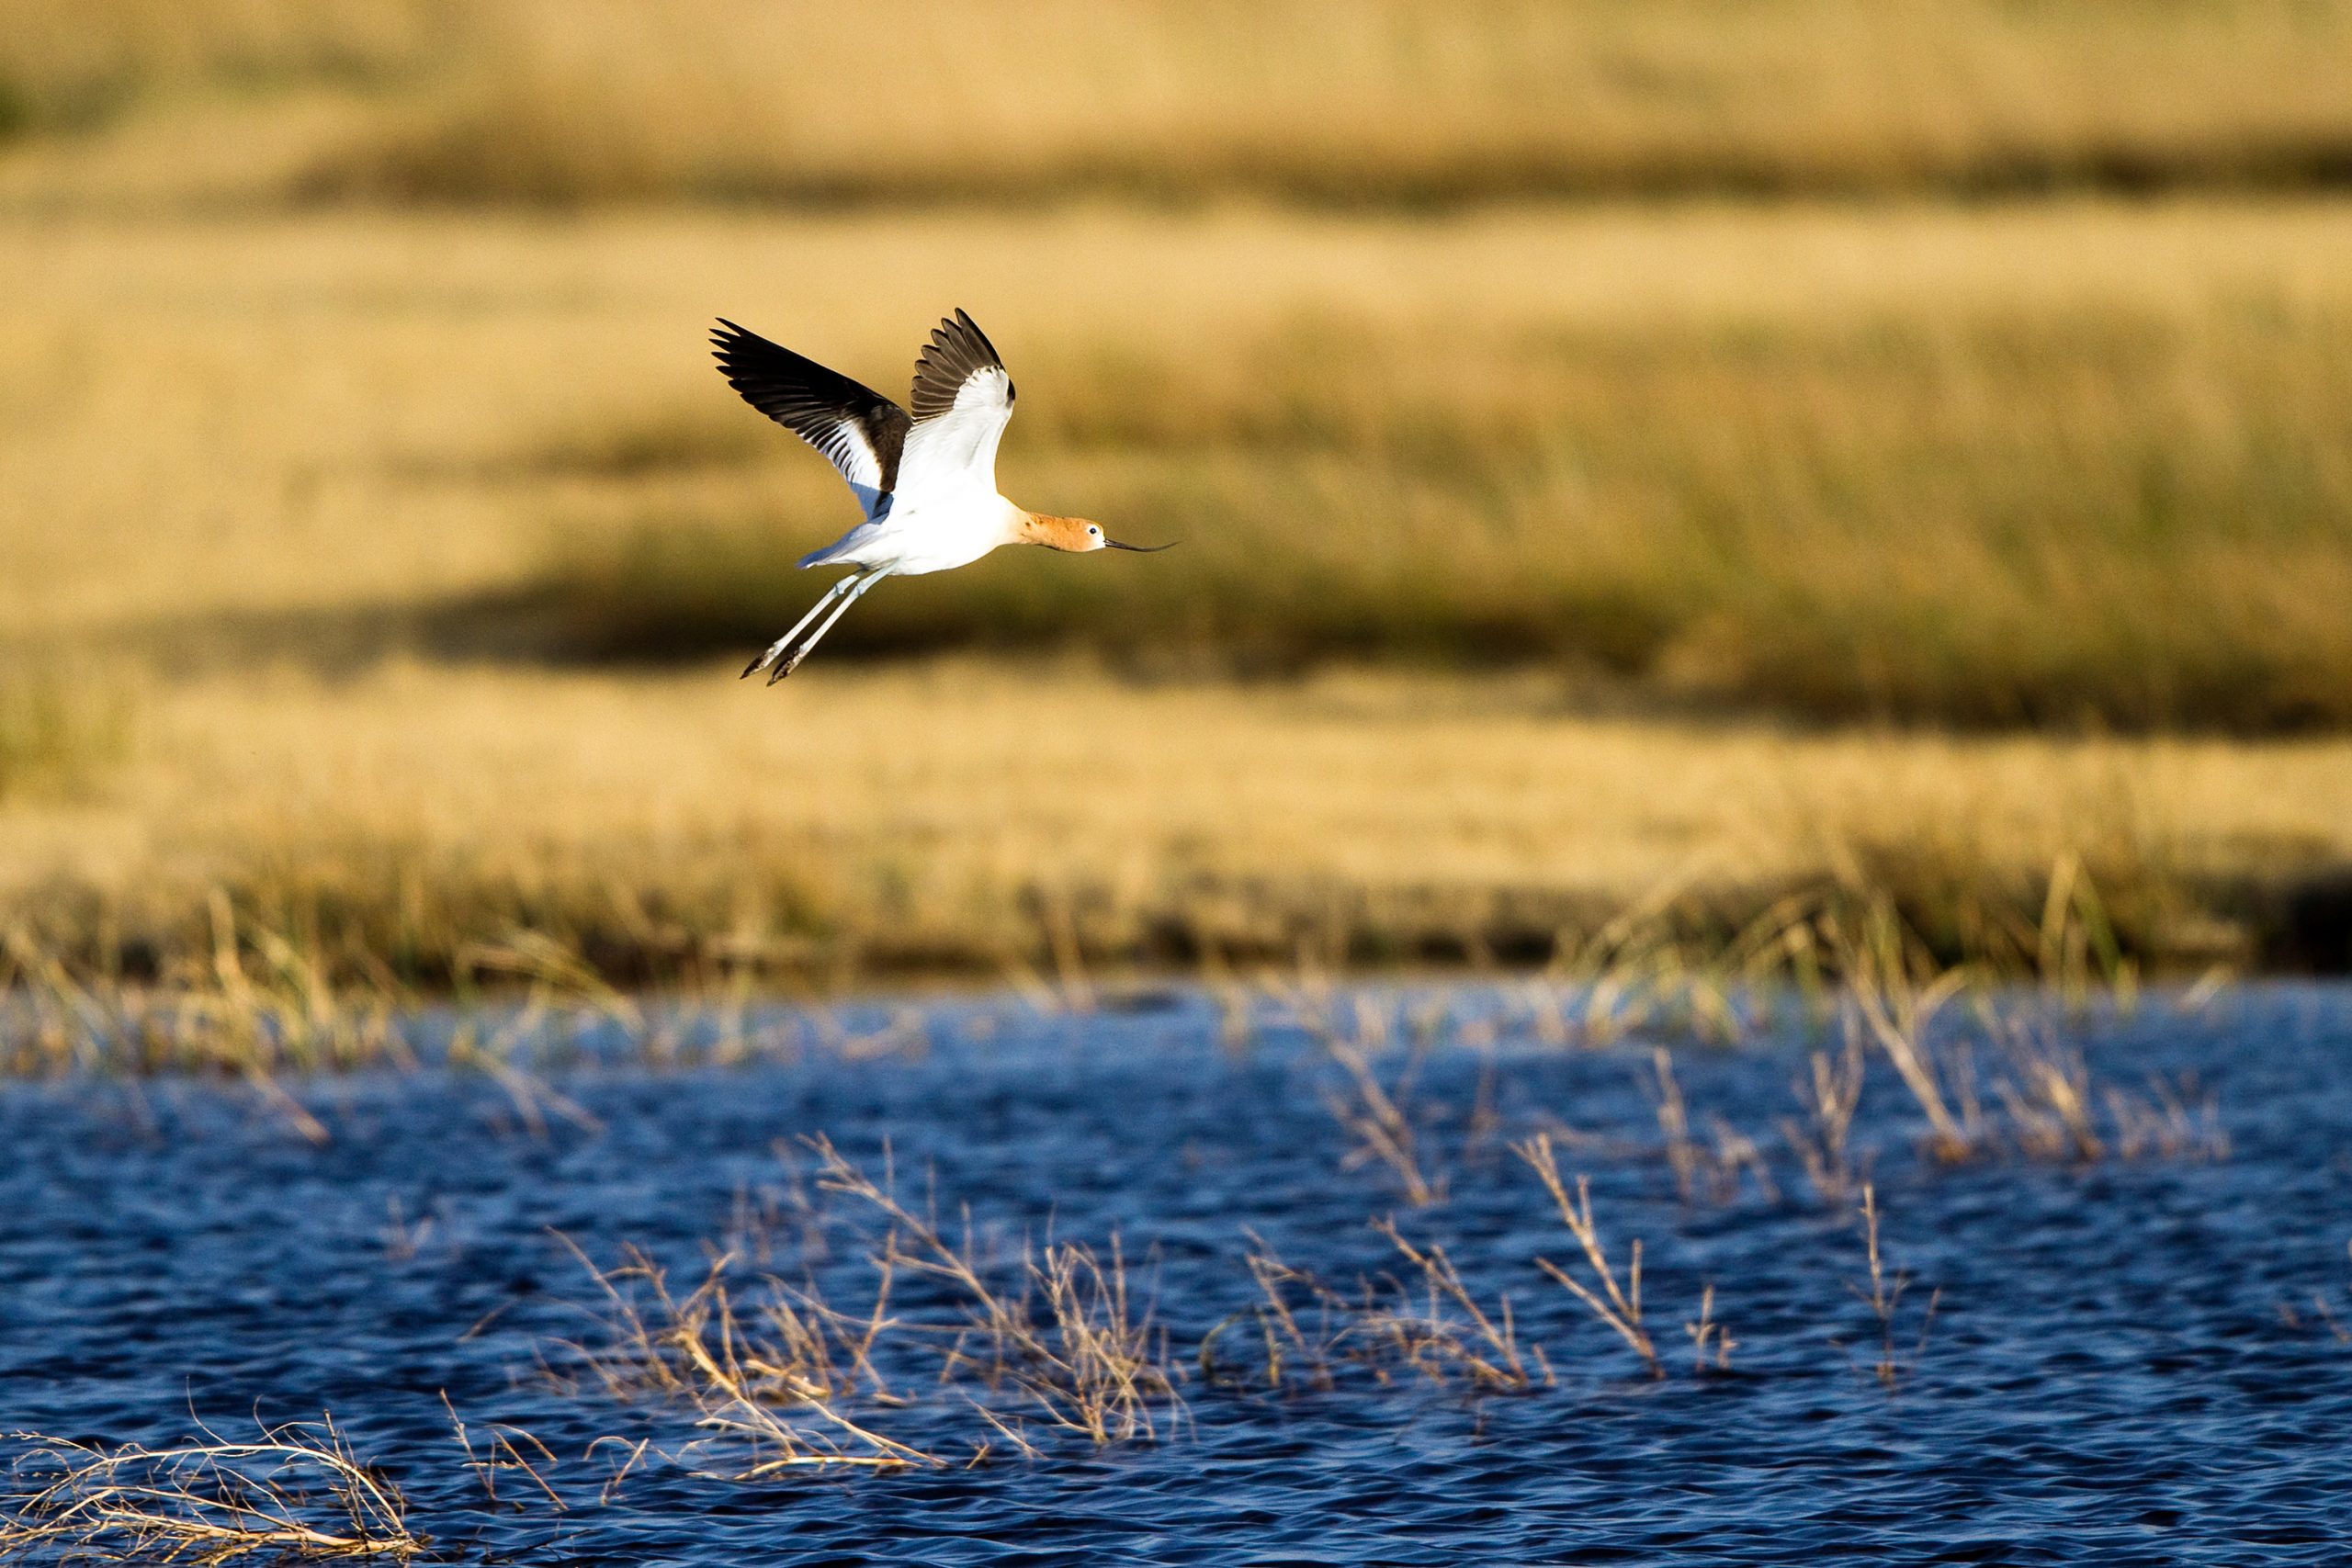 American Avocet in flight over the ripply blue water of a marsh